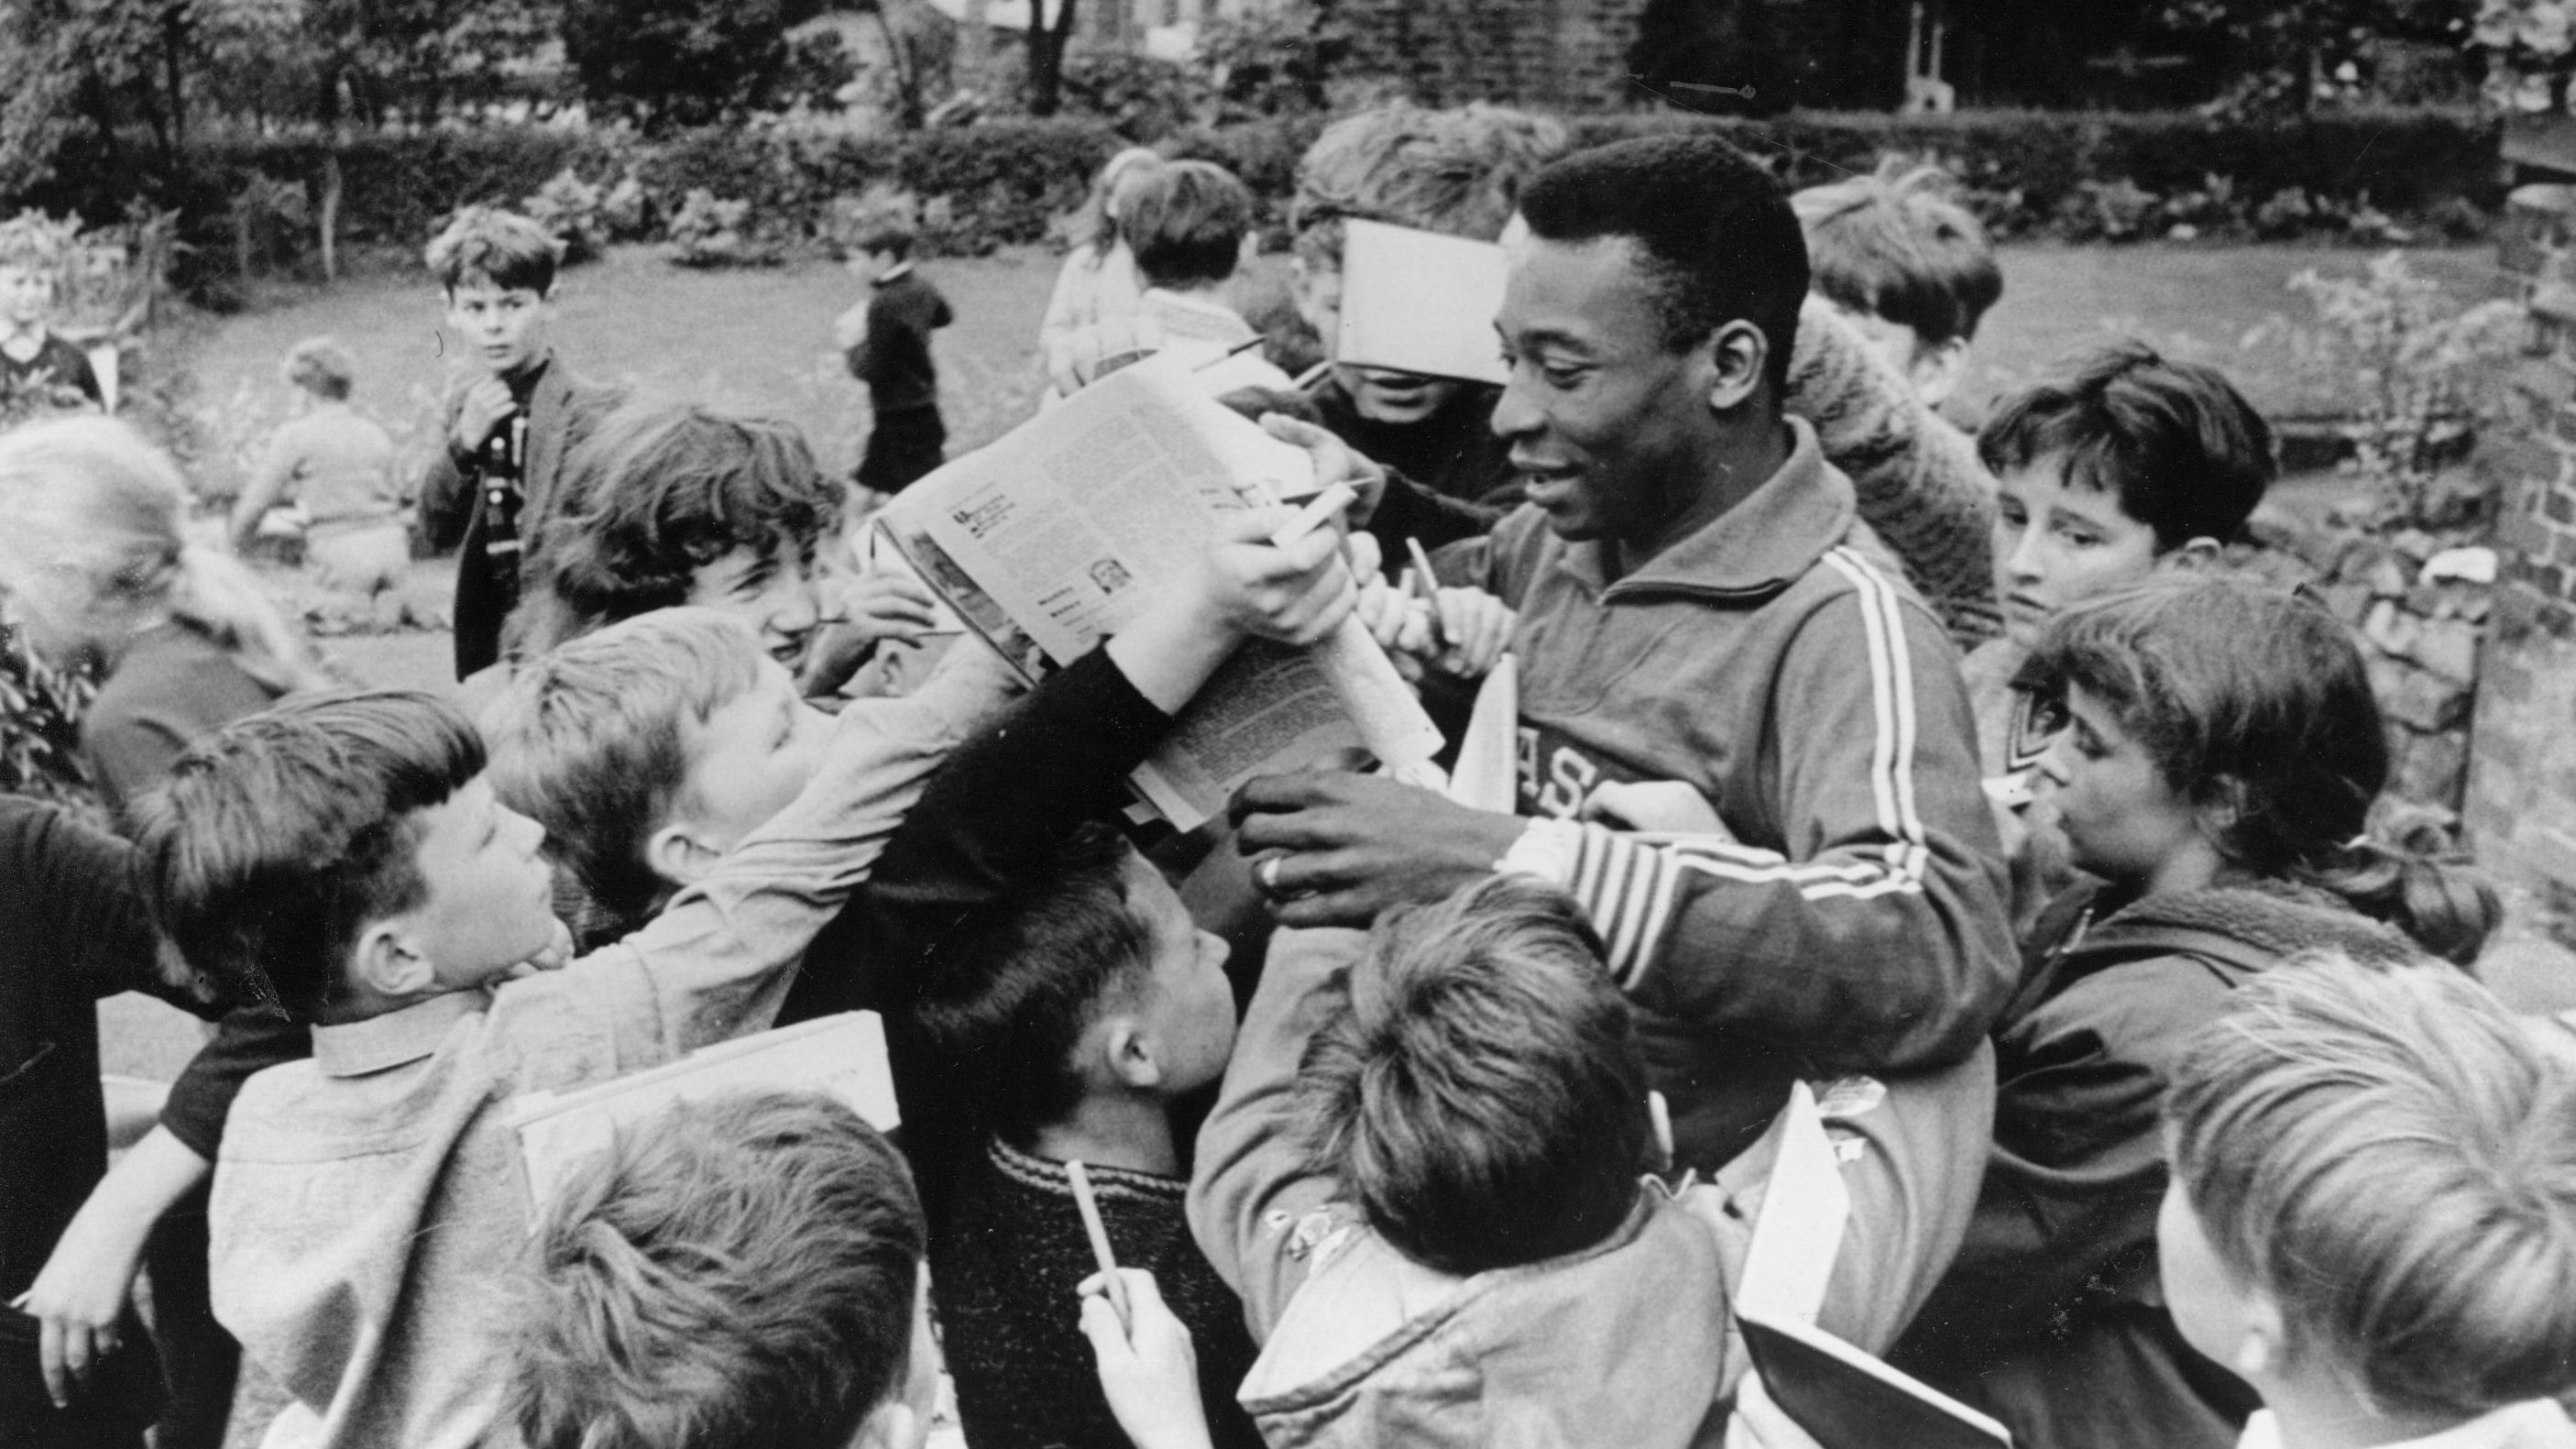 Pelé signs autographs for children in 1966. He played in the 1966 World Cup with Brazil but the team didn't advance out of the group stage that year.